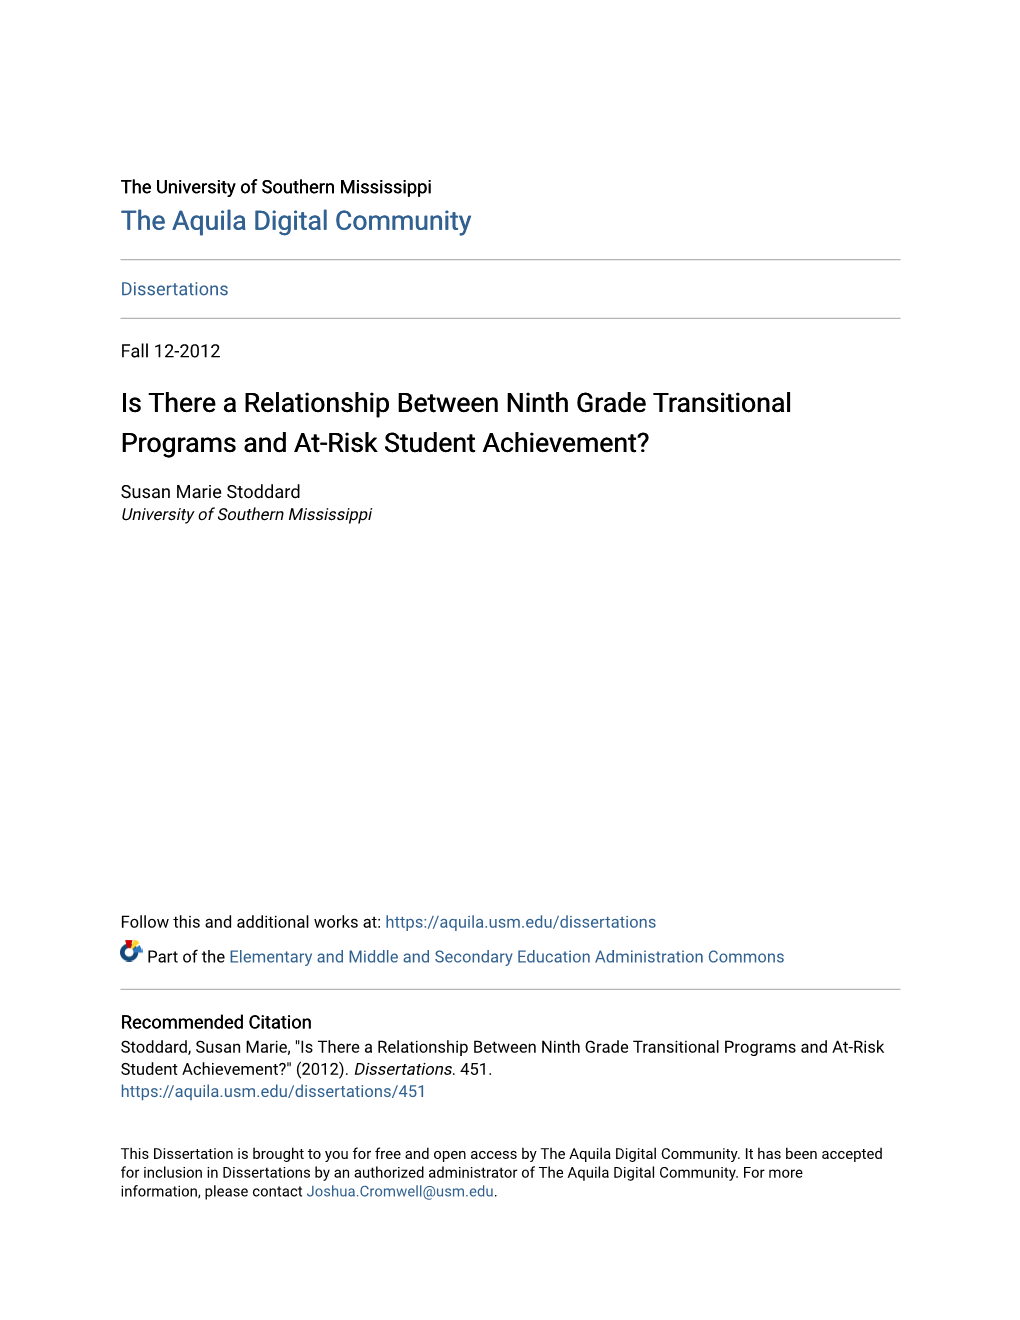 Is There a Relationship Between Ninth Grade Transitional Programs and At-Risk Student Achievement?